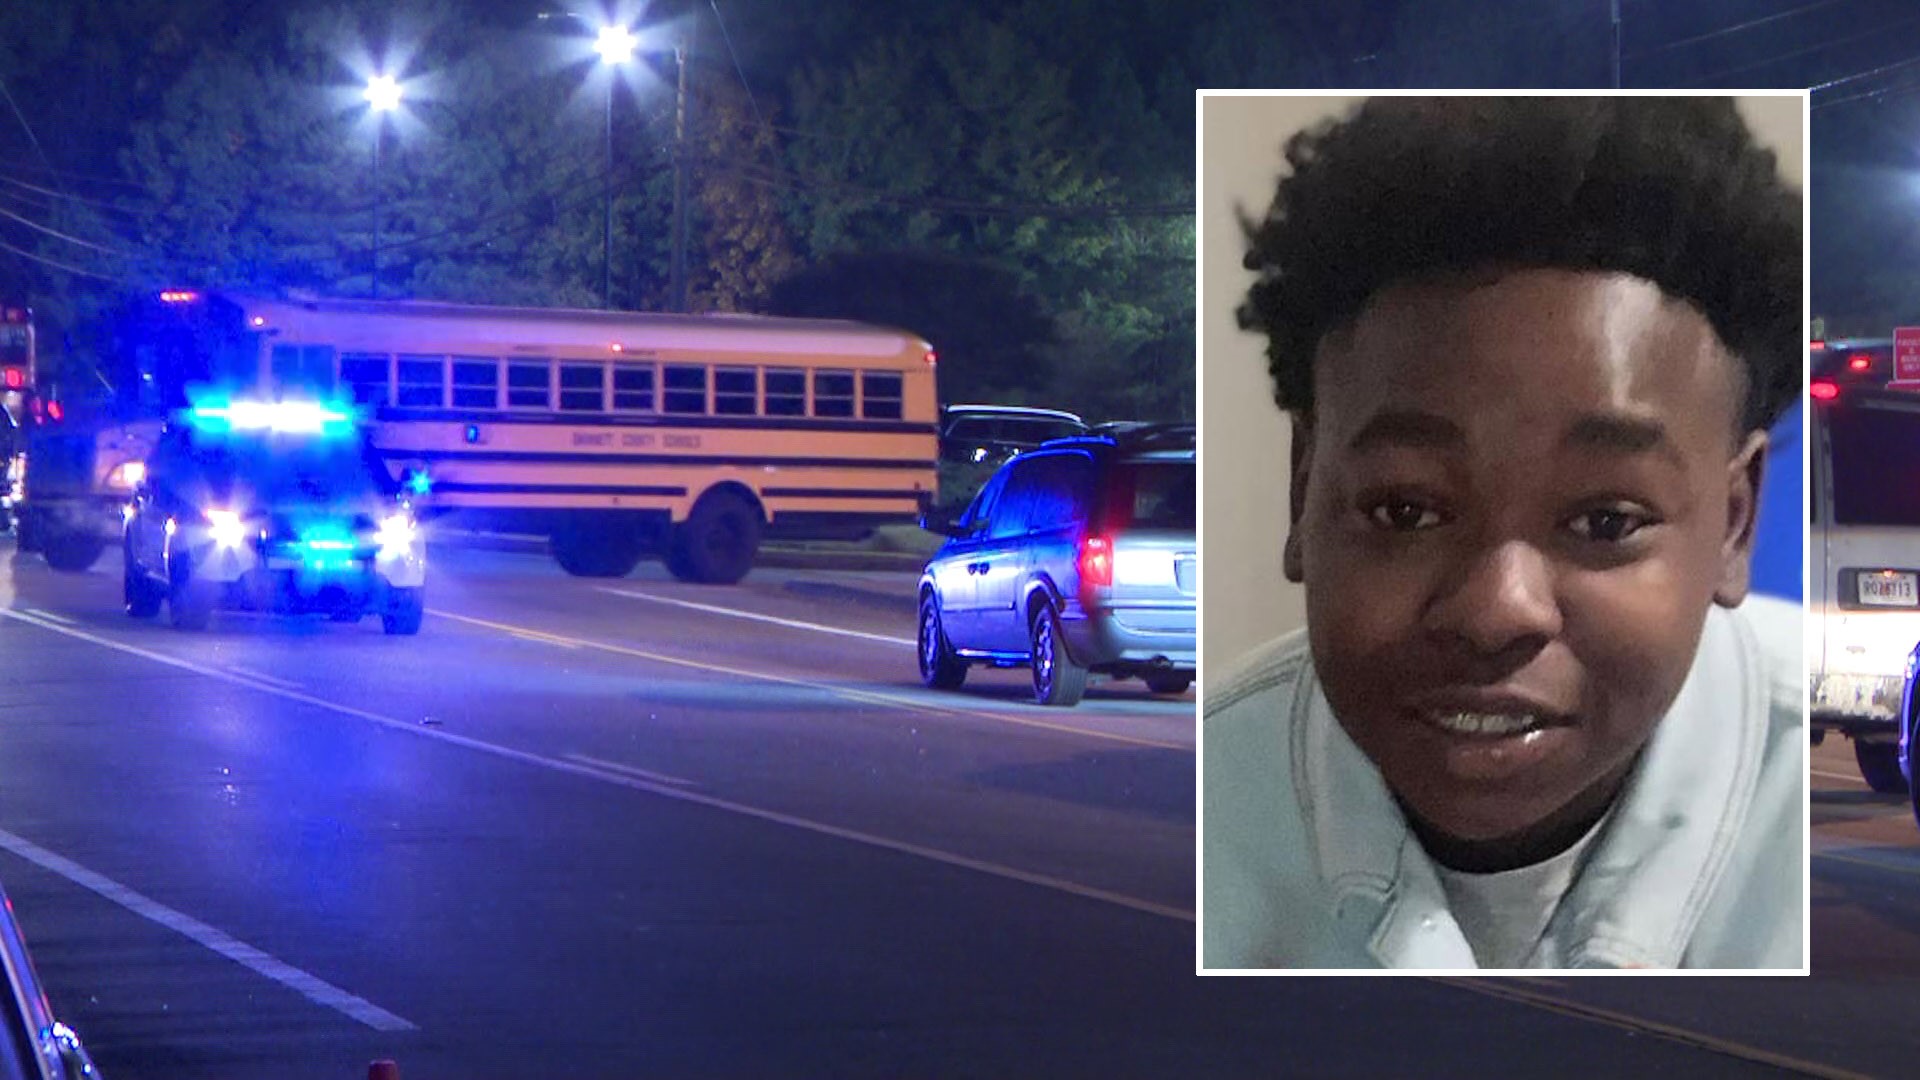 Police identified the 17-year-old student as DeAndre Henderson.